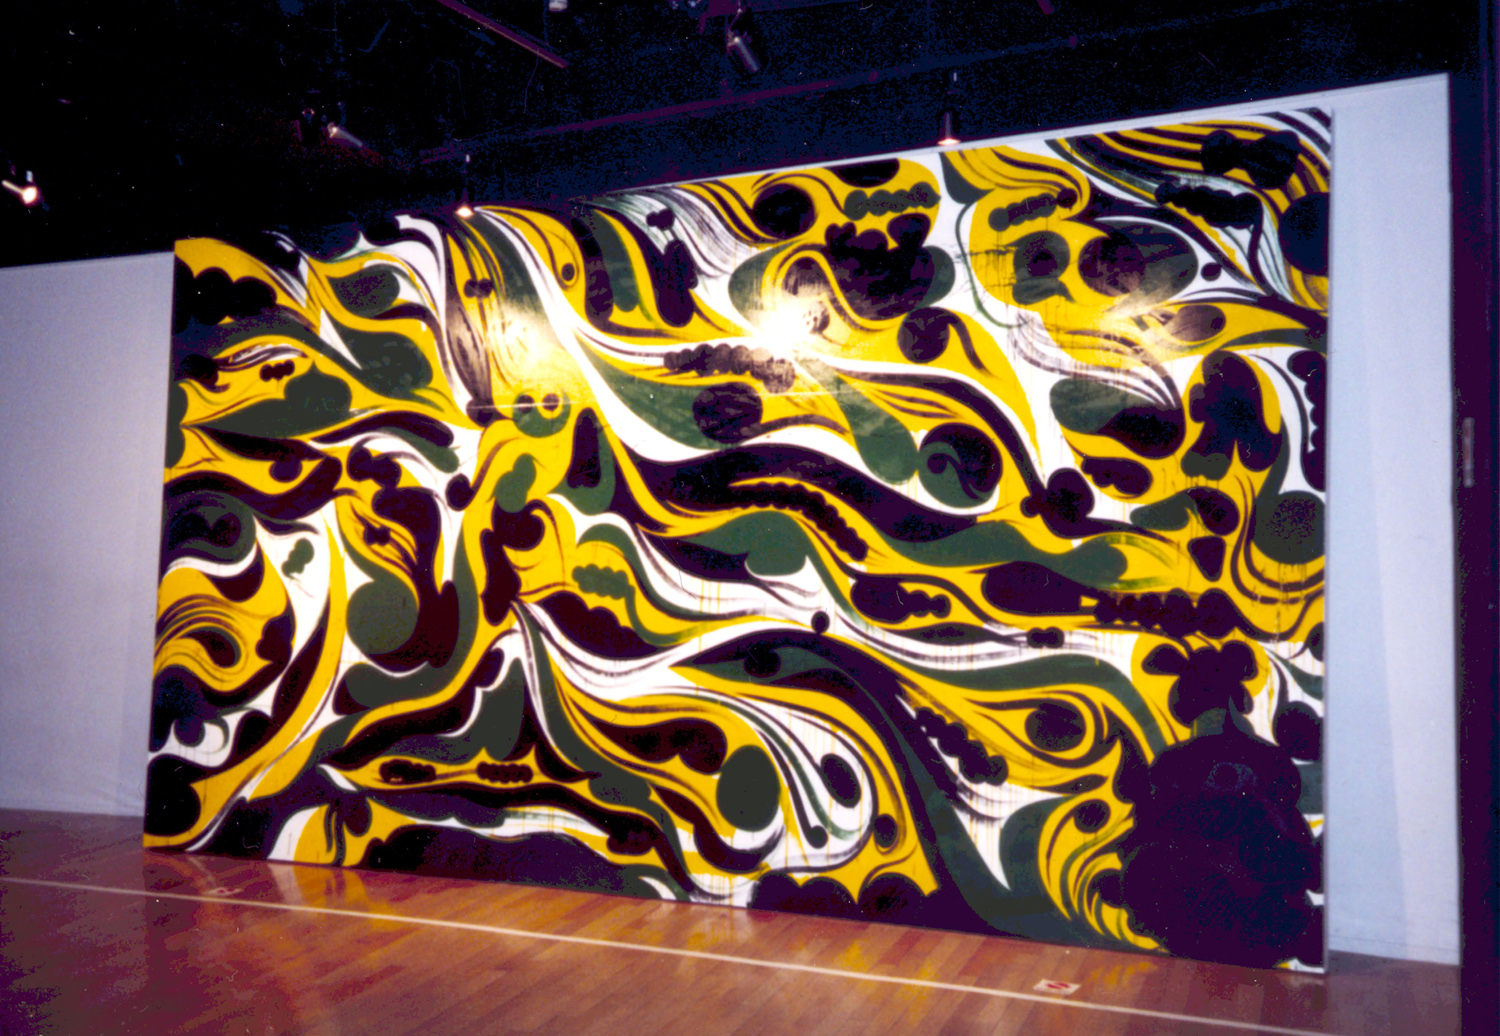  installation view,  Final Modification I  Ex' Realm Gallery Tokyo, Japan, 2003  with artists David Ellis and  Kami  